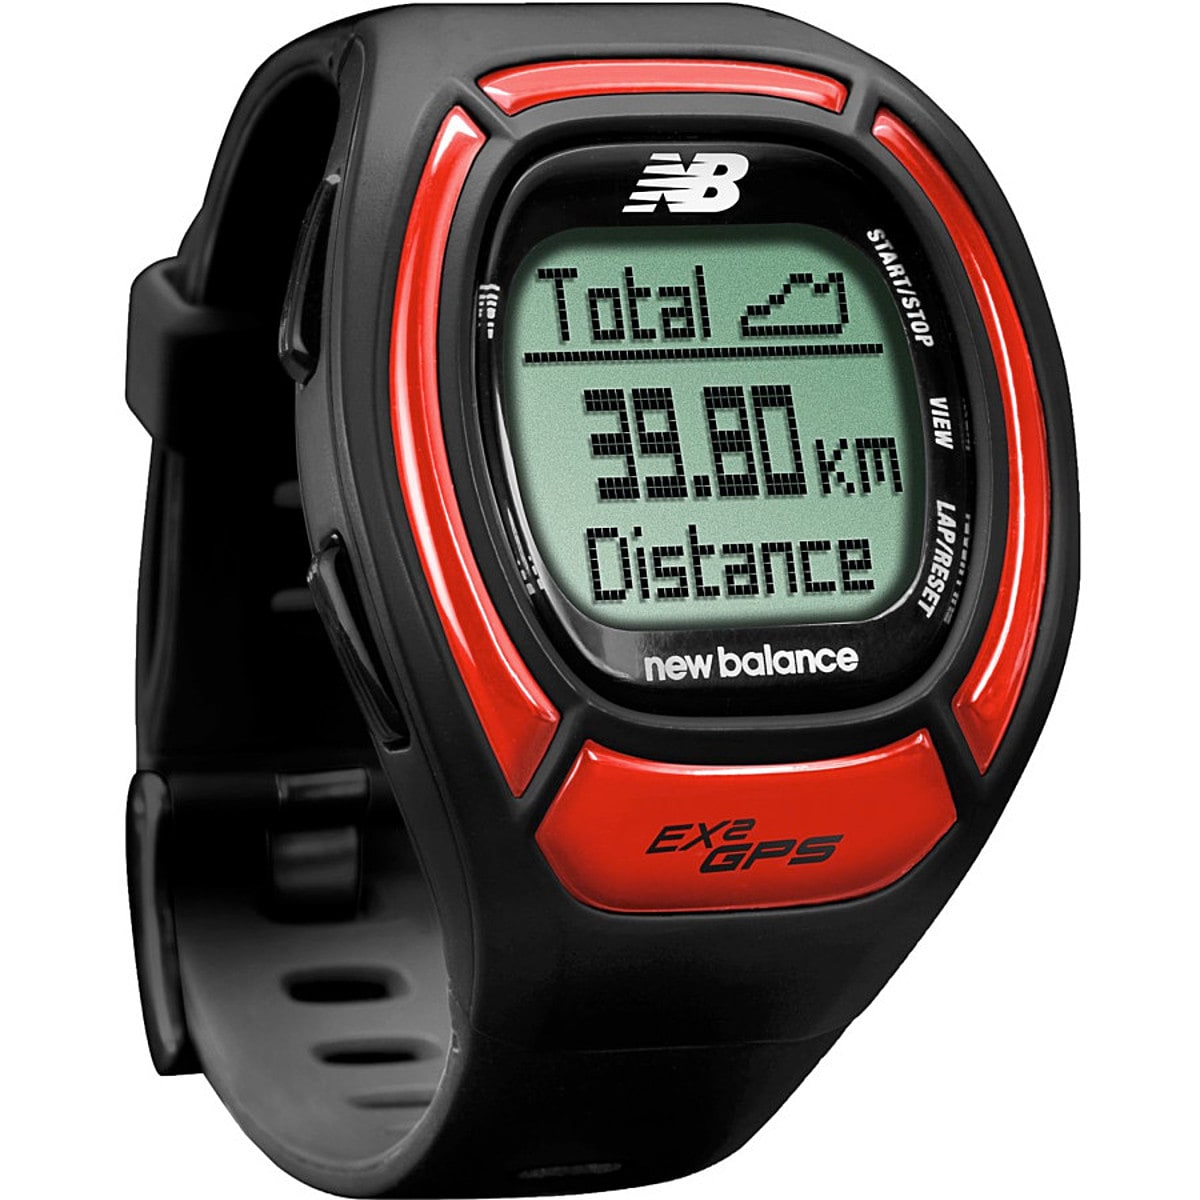 alcanzar Consecutivo obesidad New Balance Watches NX980 GPS Trainer plus Software - Accessories